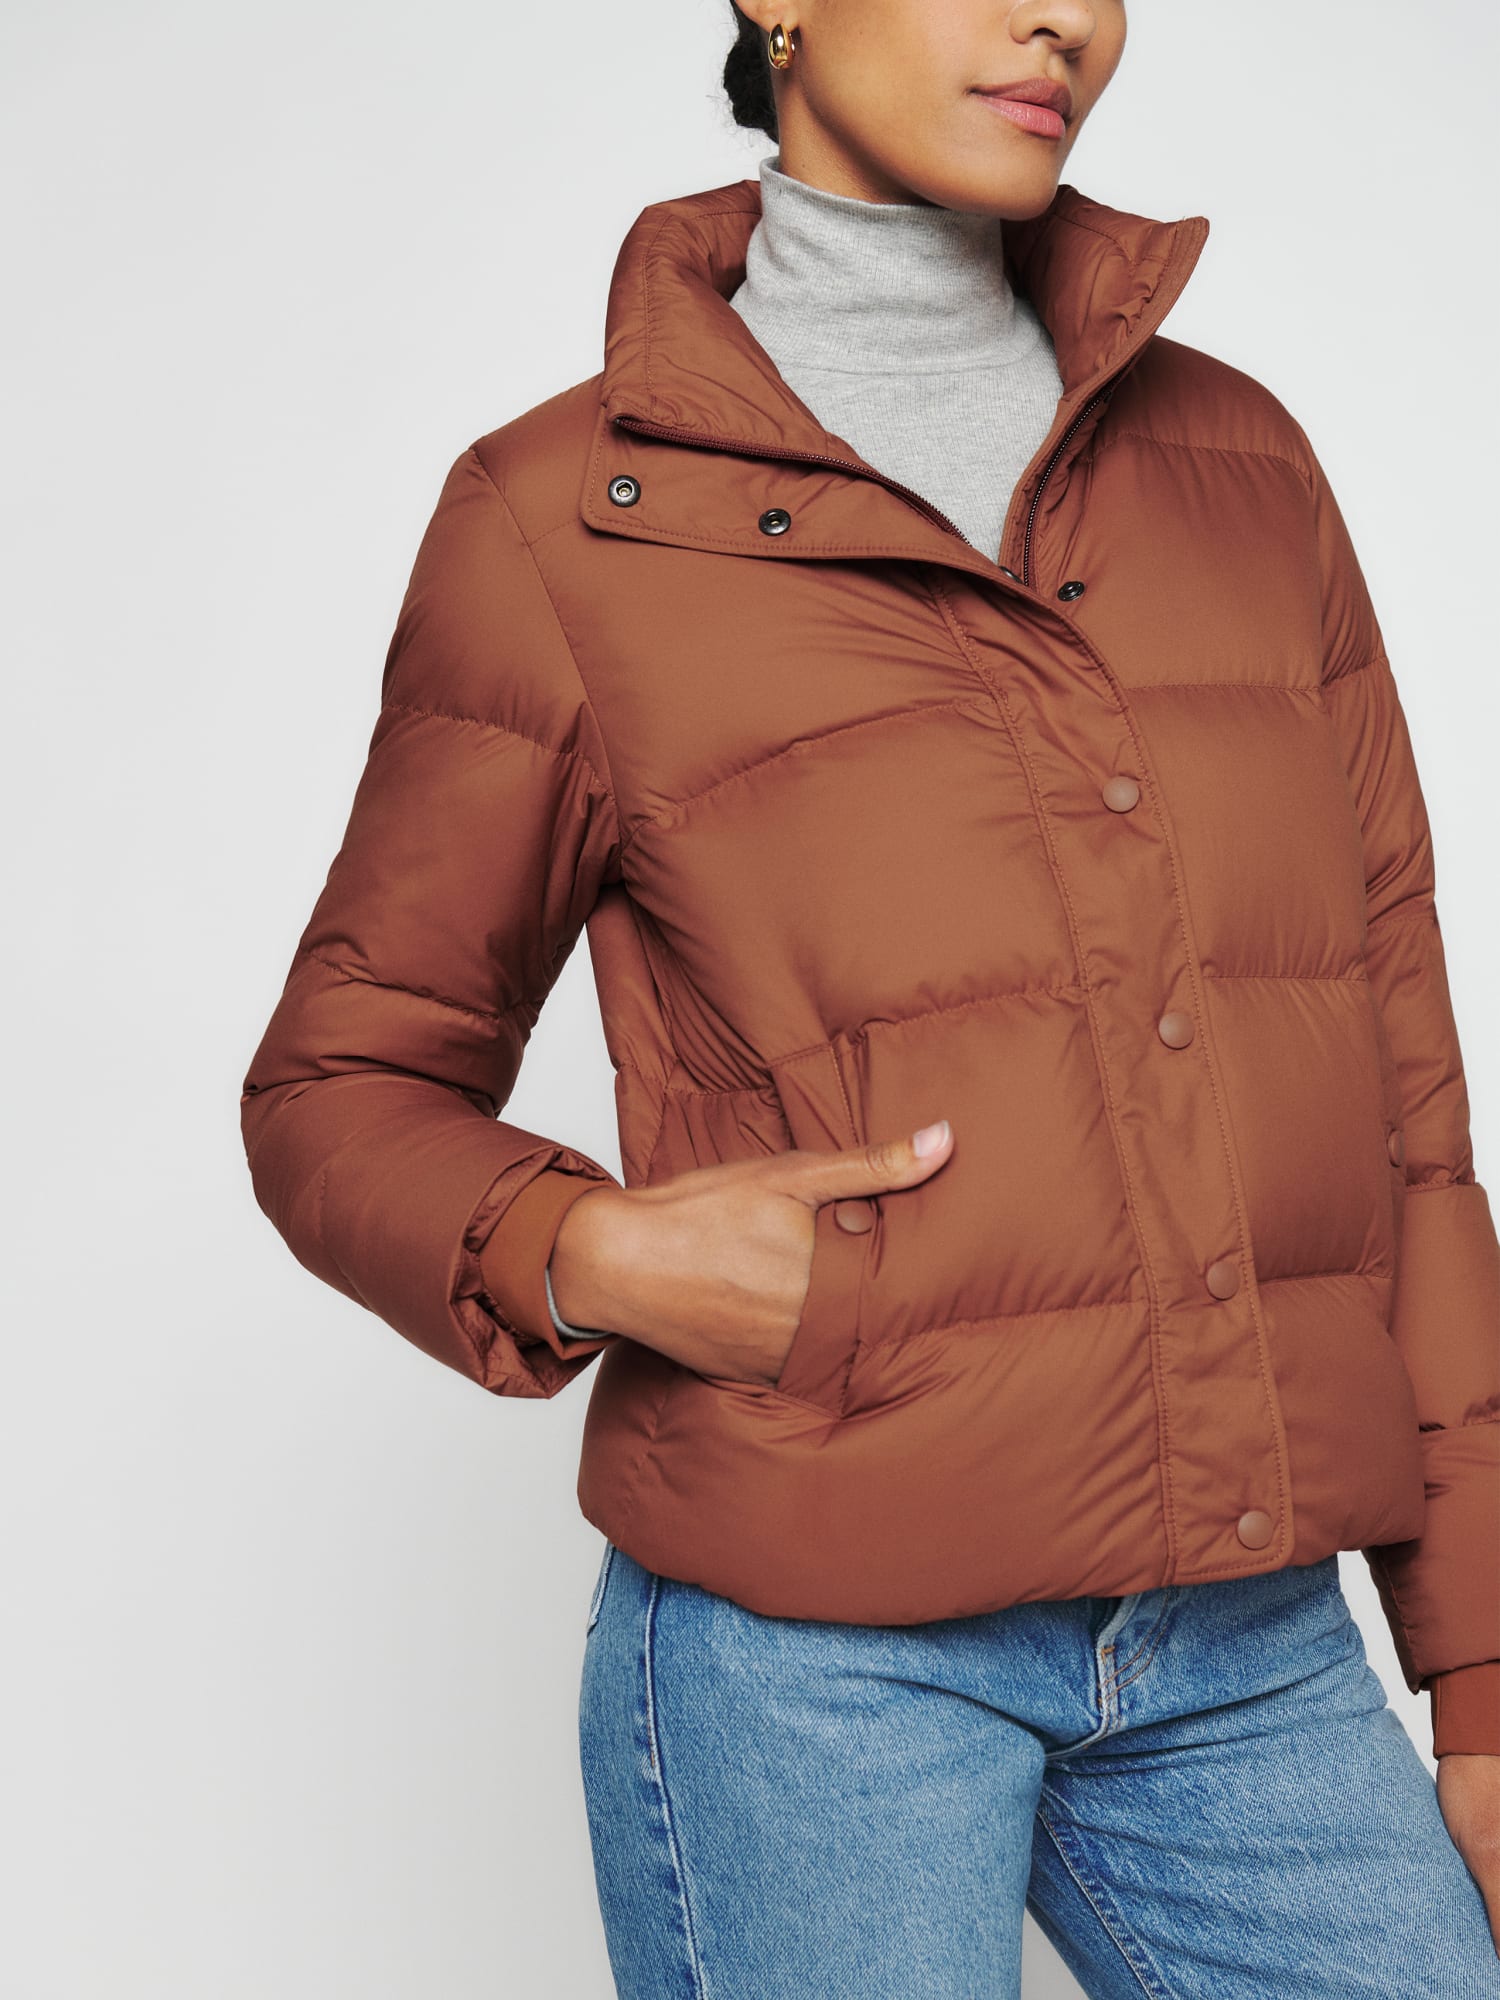 How To Wash A Patagonia Down Jacket Patagonia W'S Silent Down Jacket - | Reformation